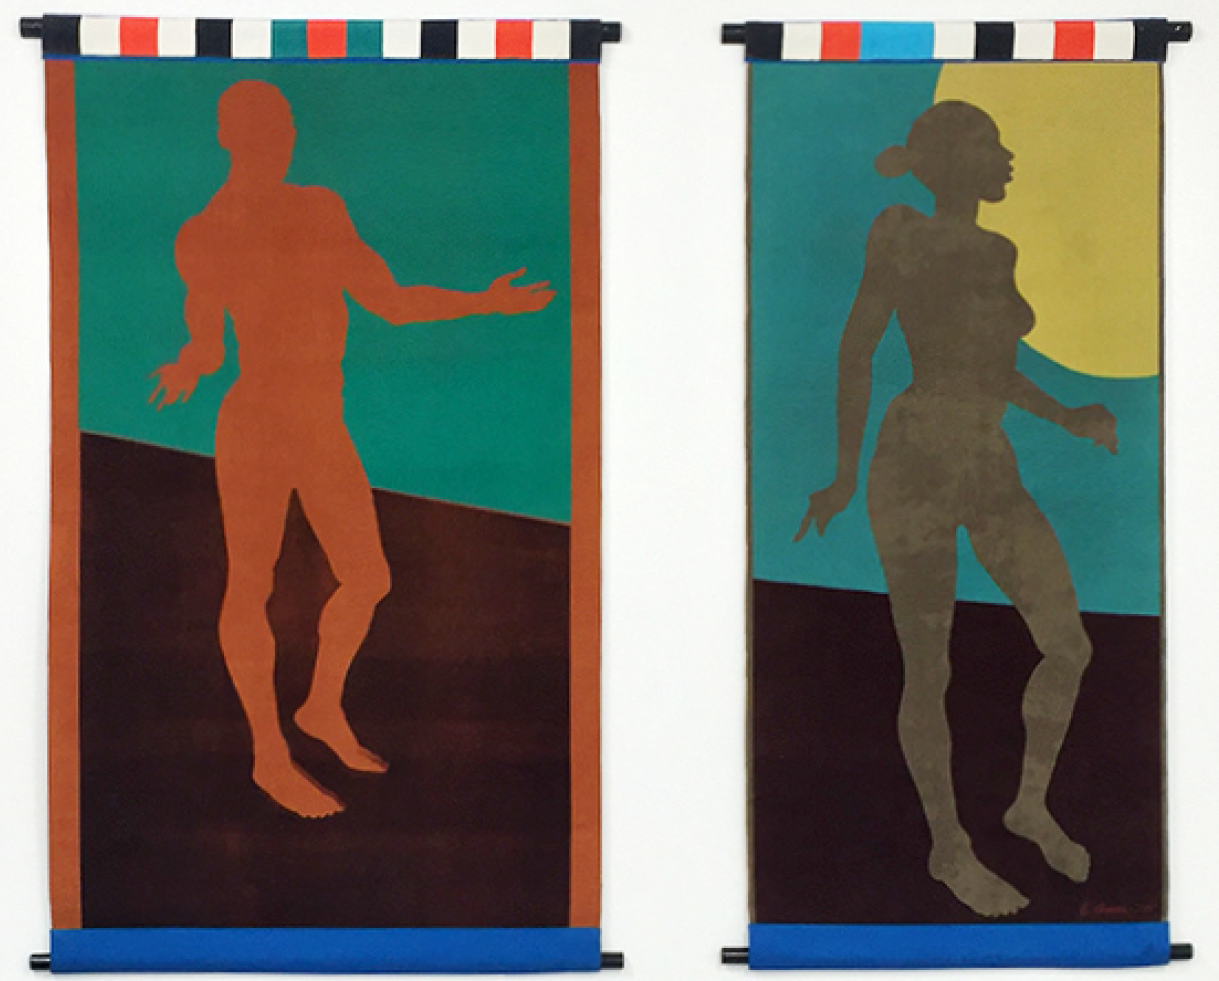 Baby (diptych), 2001 Unique stencil printed on fabric with woven African fabric border Woman: 61 x 26 3/4 inches (154.9 x 67.9 cm) Man: 61 1/2 x 35 1/4 inches (156.2 x 89.5 cm)